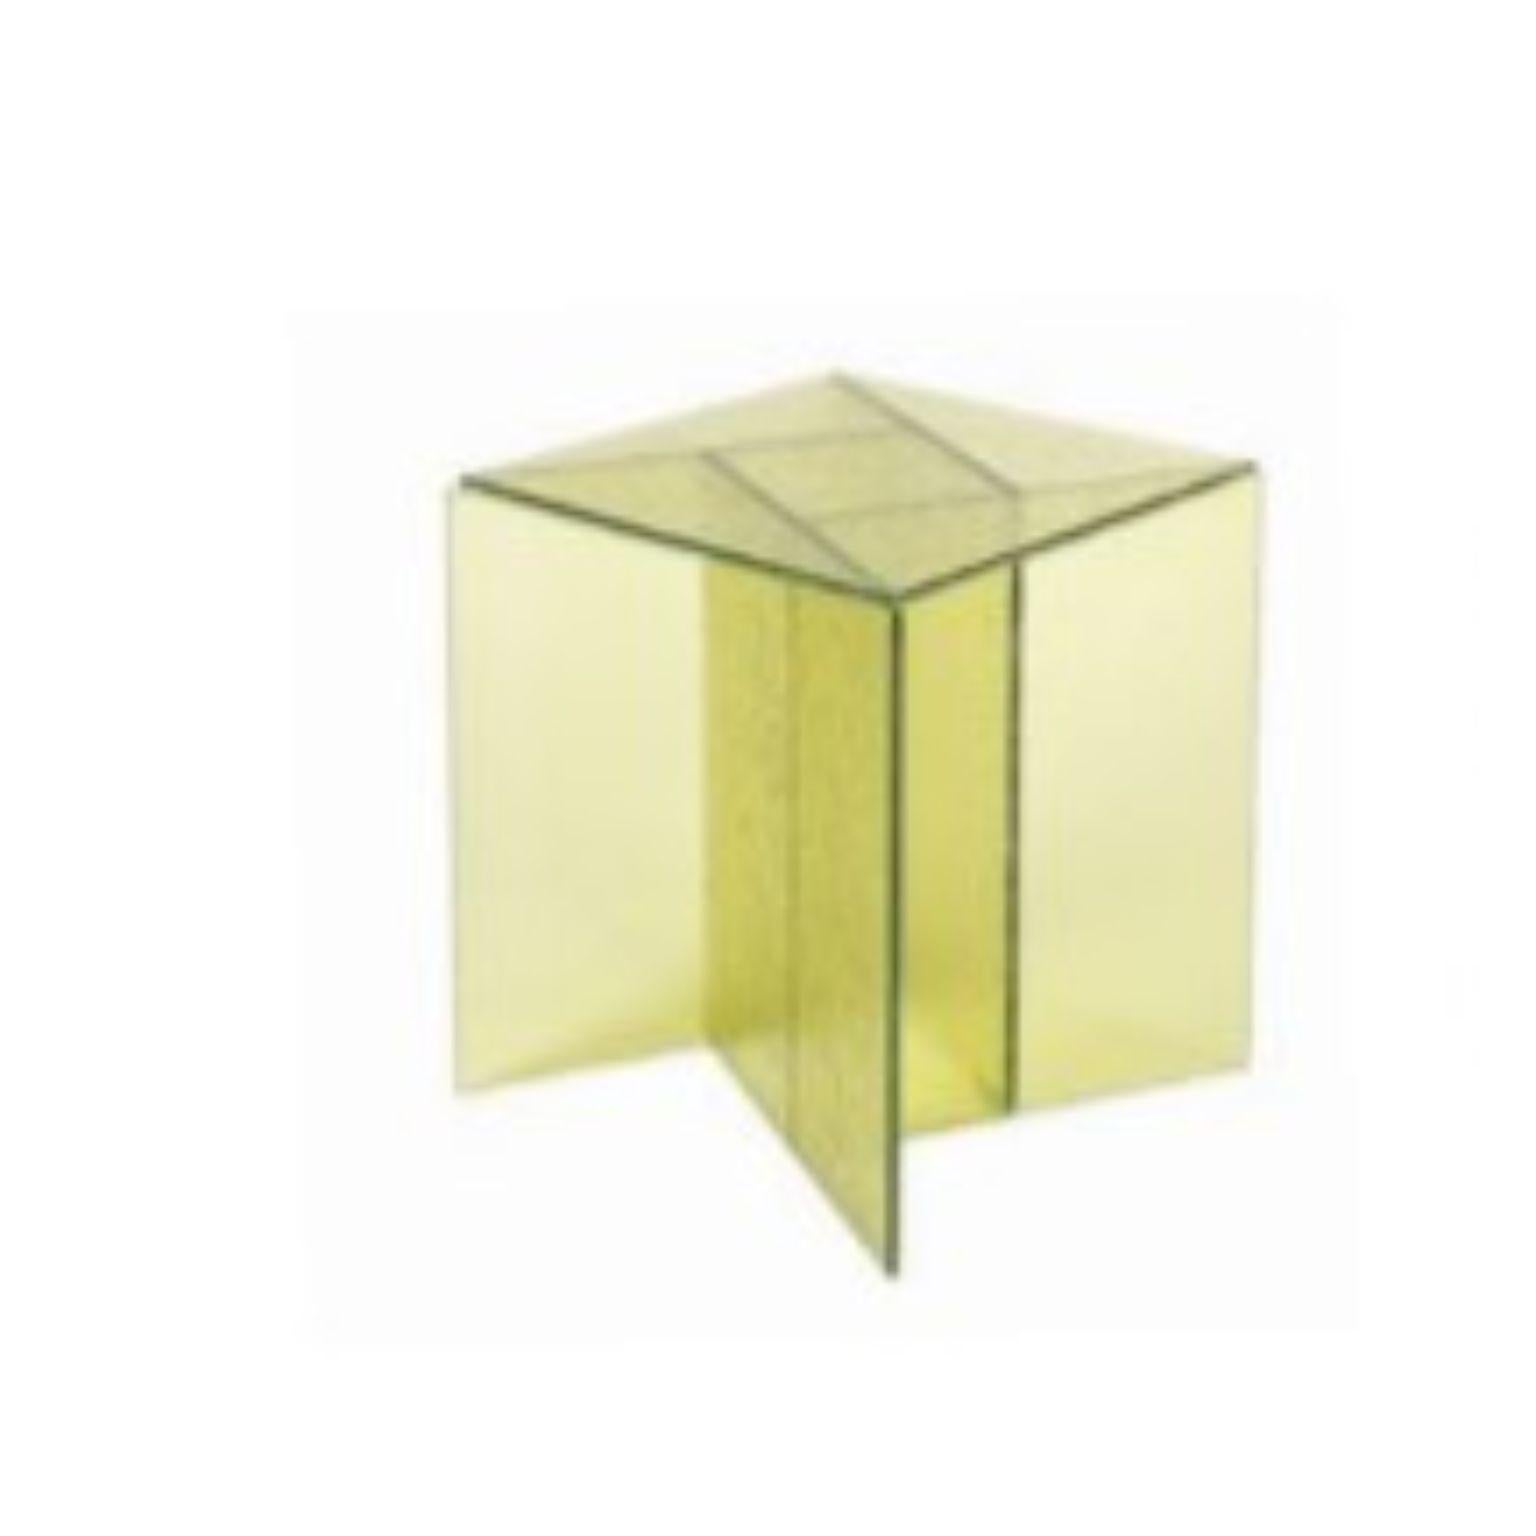 Aspa small side table by Pulpo
Dimensions: D40 x W40 x H50 cm
Materials: glass

Also available in different colours. 

Variety is a pleasure. Aspa, the side table concept from the Spanish design studio MUT, is a simple study in geometry. Five